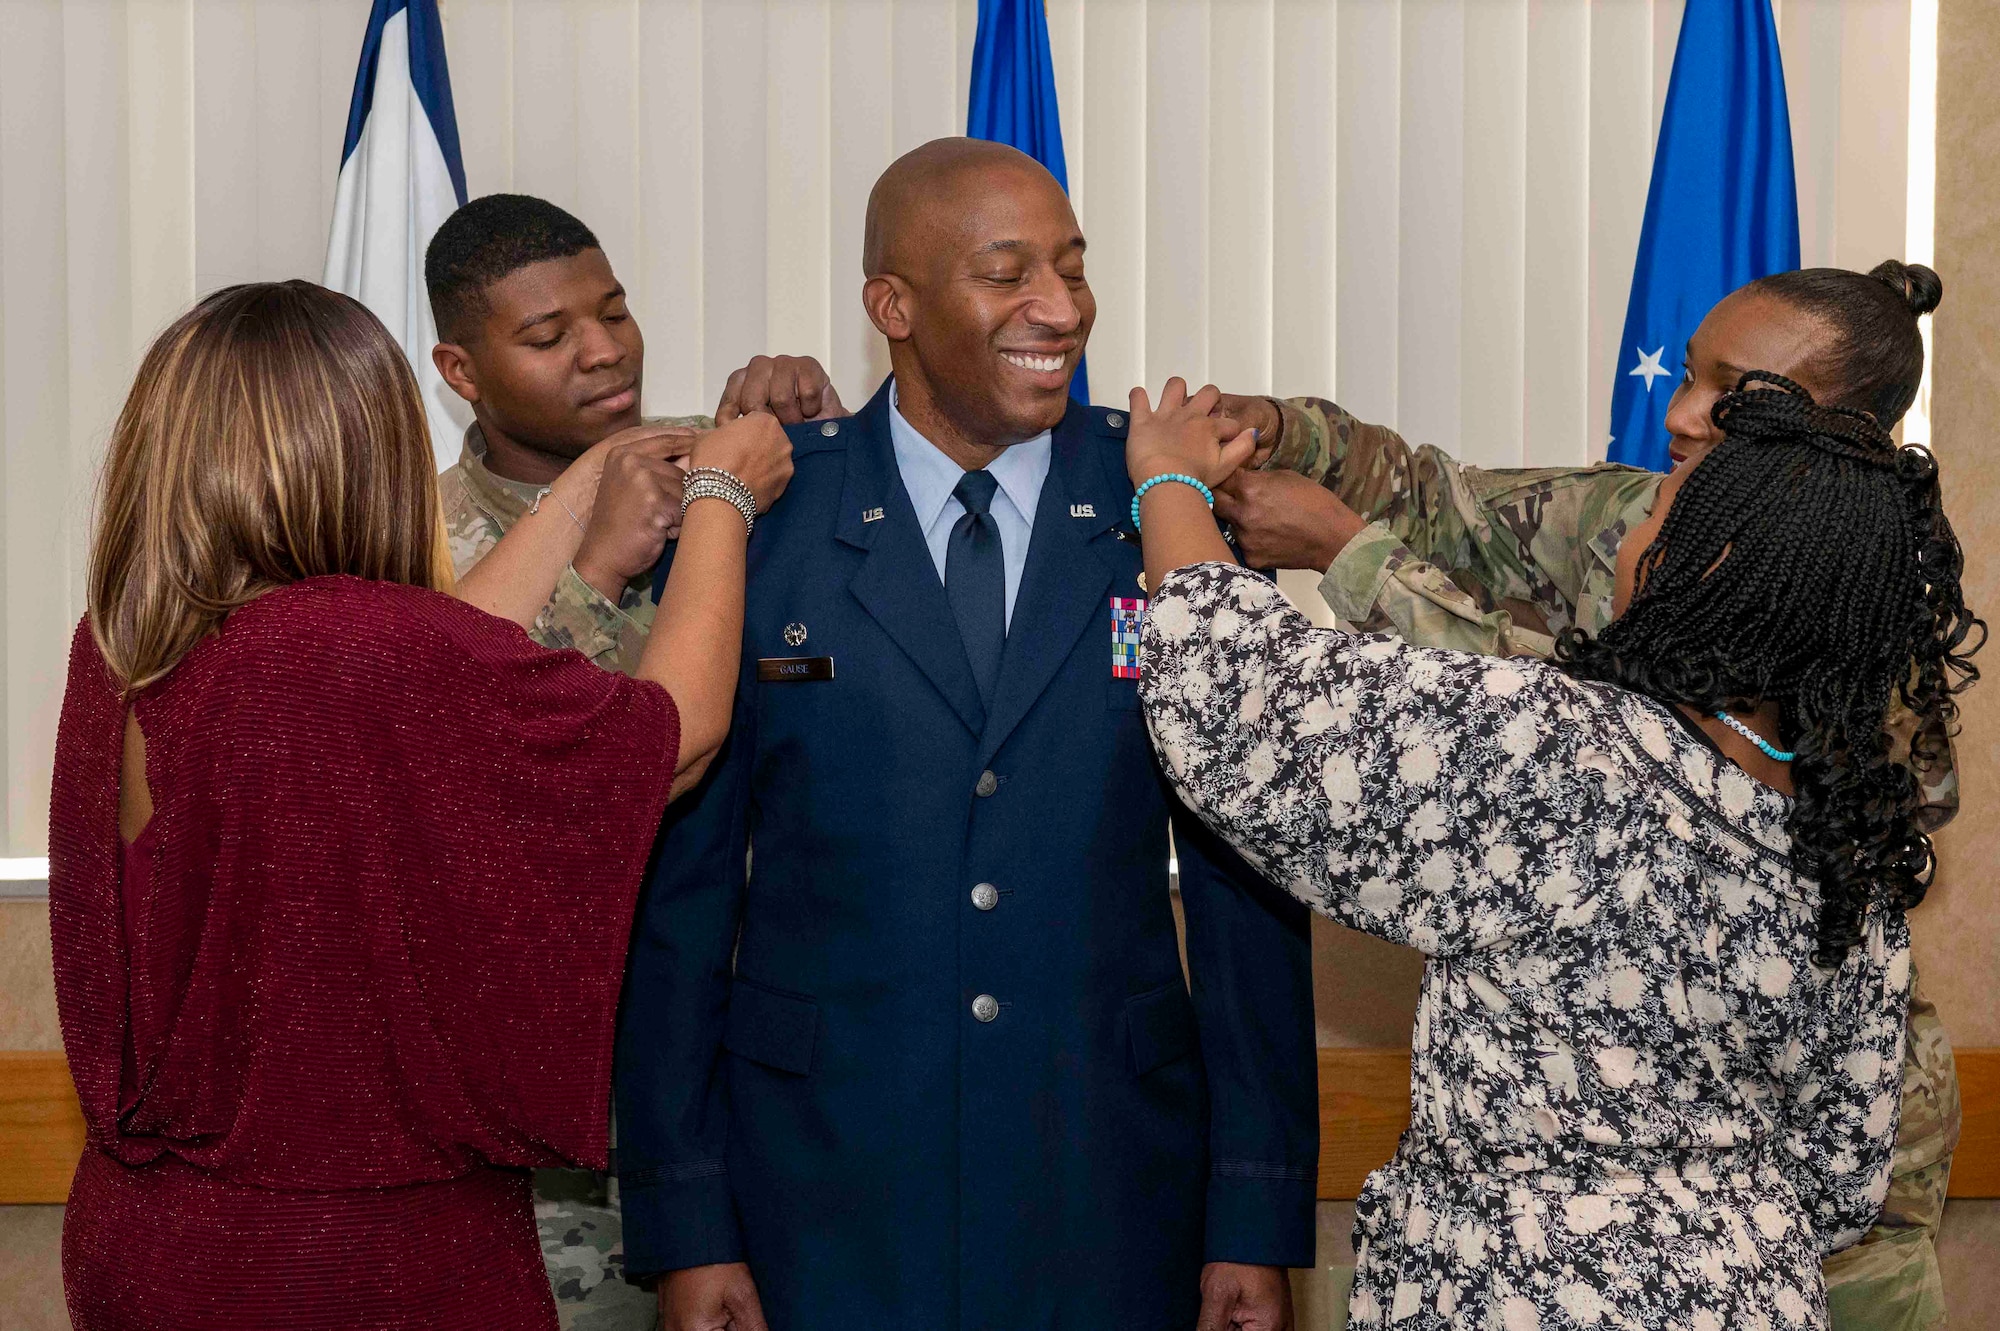 U.S. Air Force Col. Corey Gause, commander of the 167th Mission Support Group, stands surrounded by his family as they pin on his colonel rank, Jan. 7, 2023, at the 167th Airlift Wing, Martinsburg, West Virginia